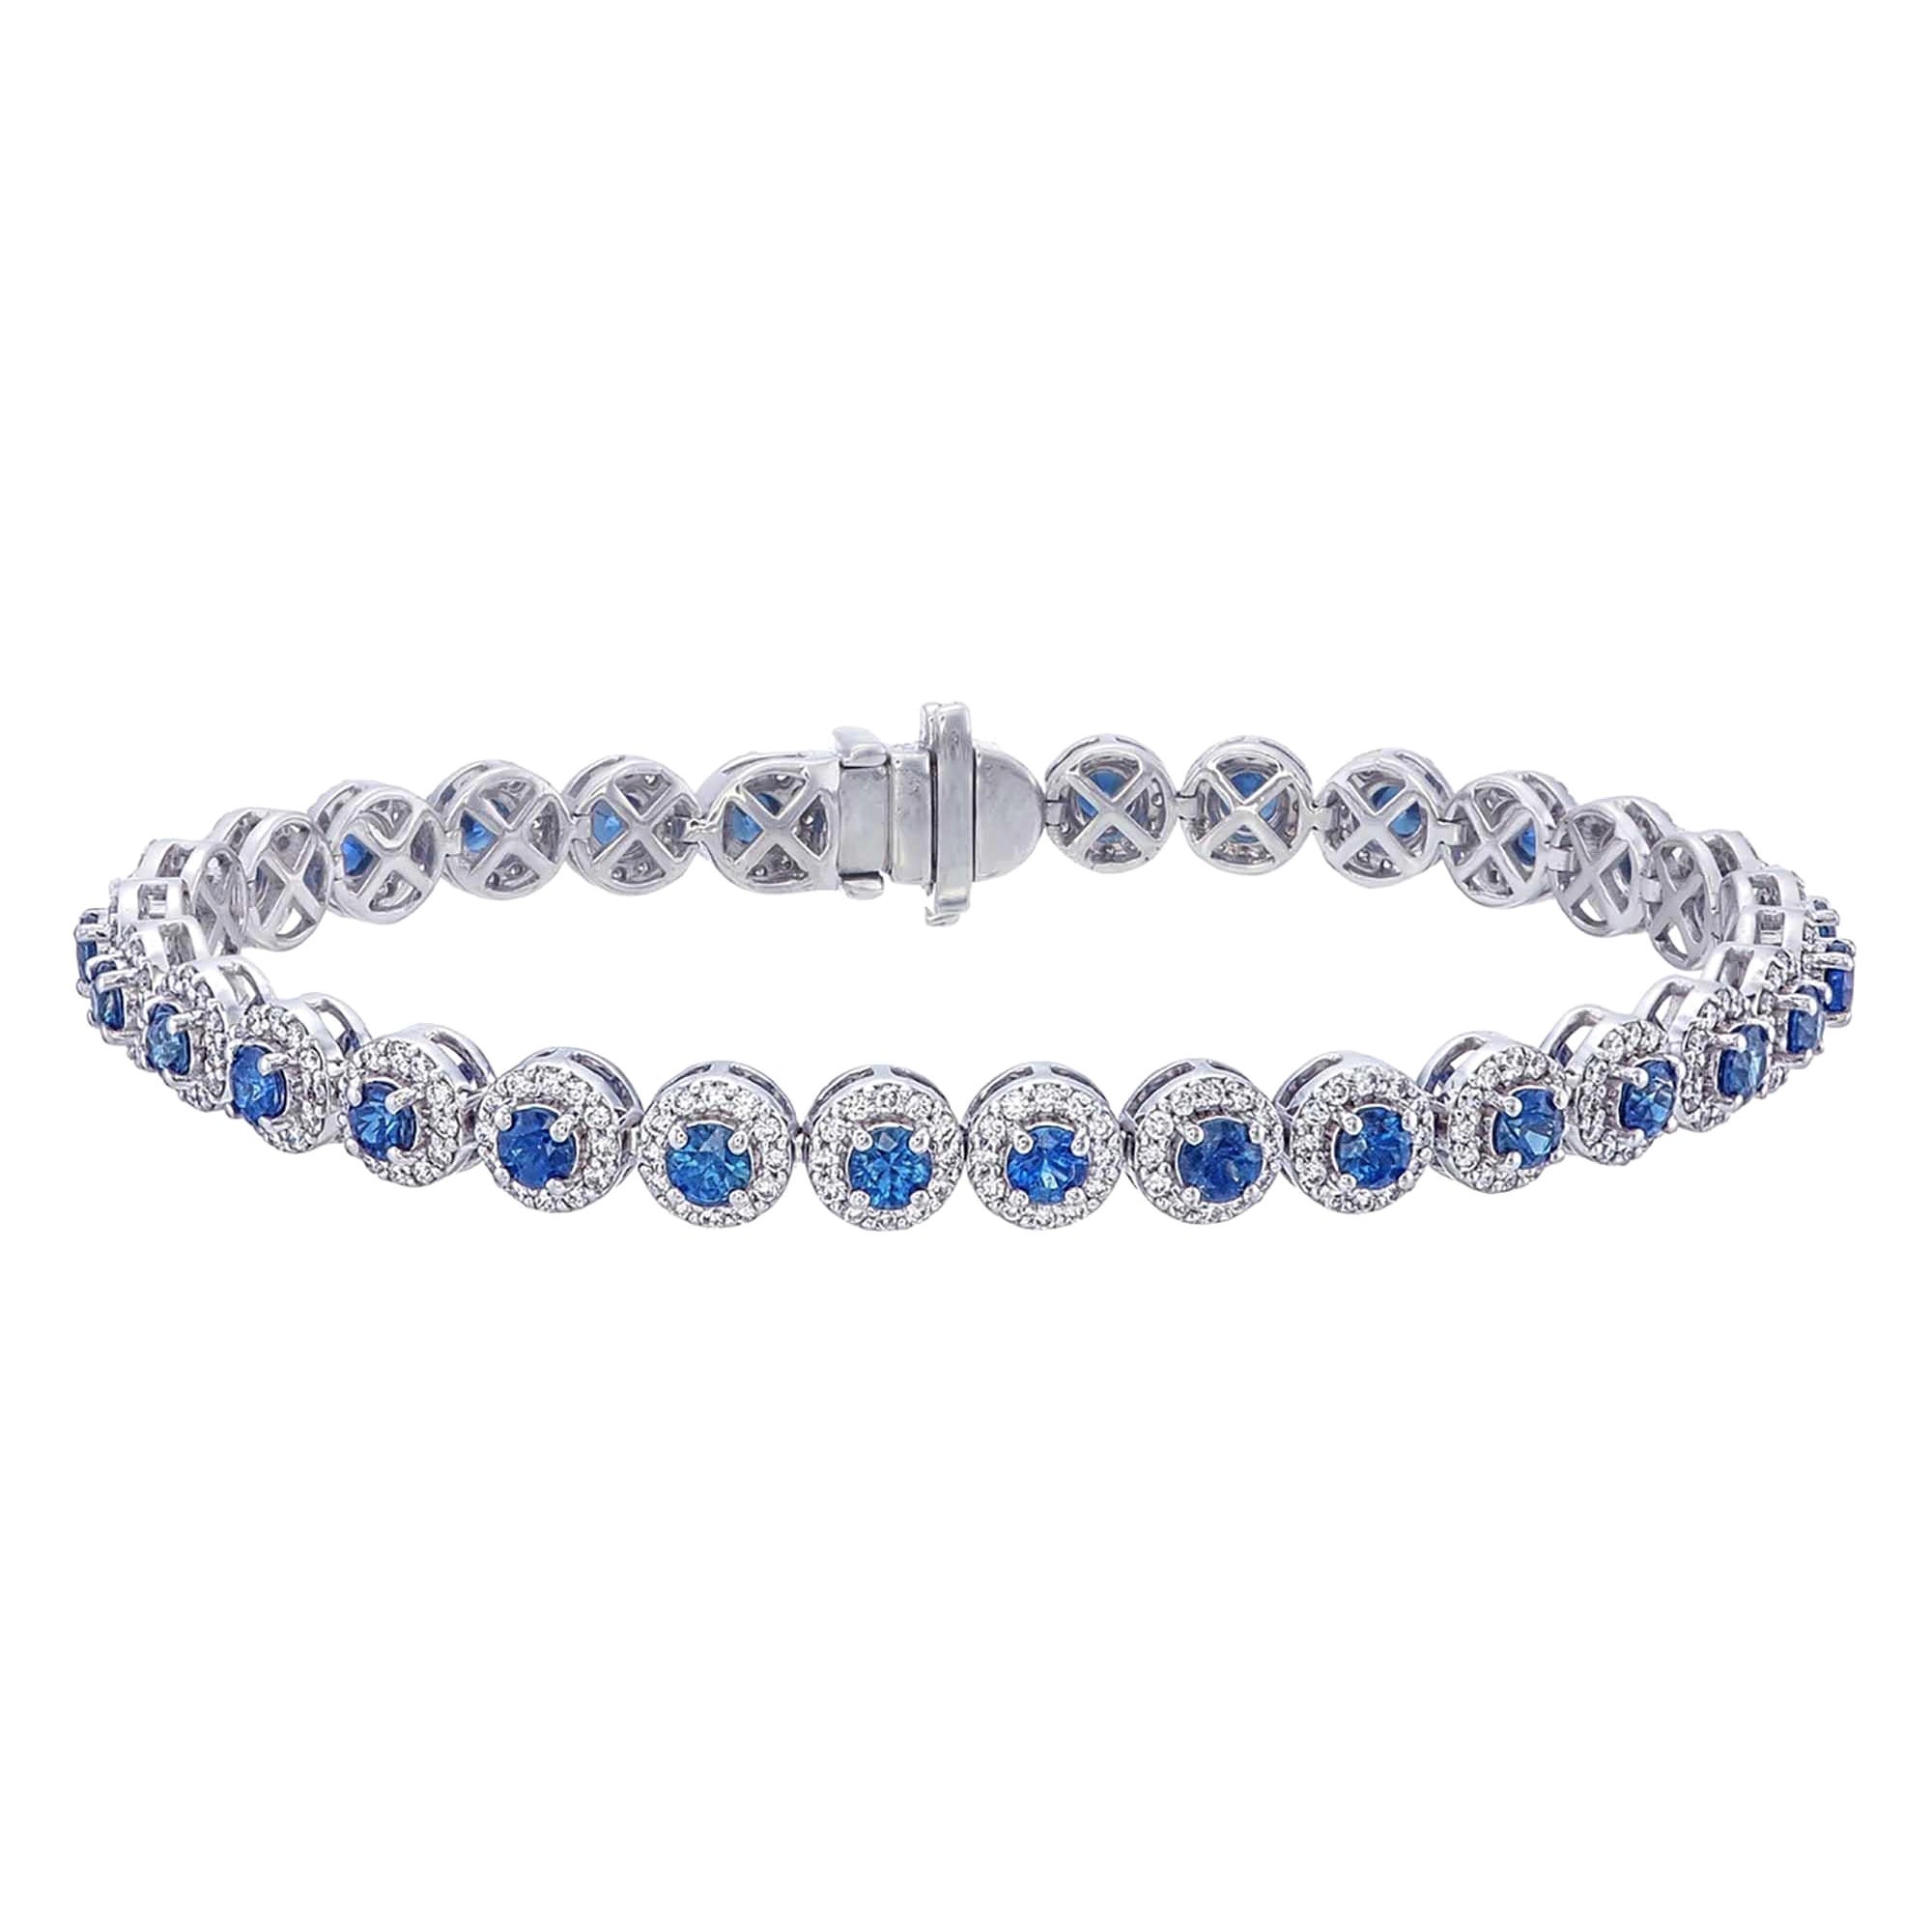 Tennis bracelet with Blue sapphire and a halo of diamond all around 